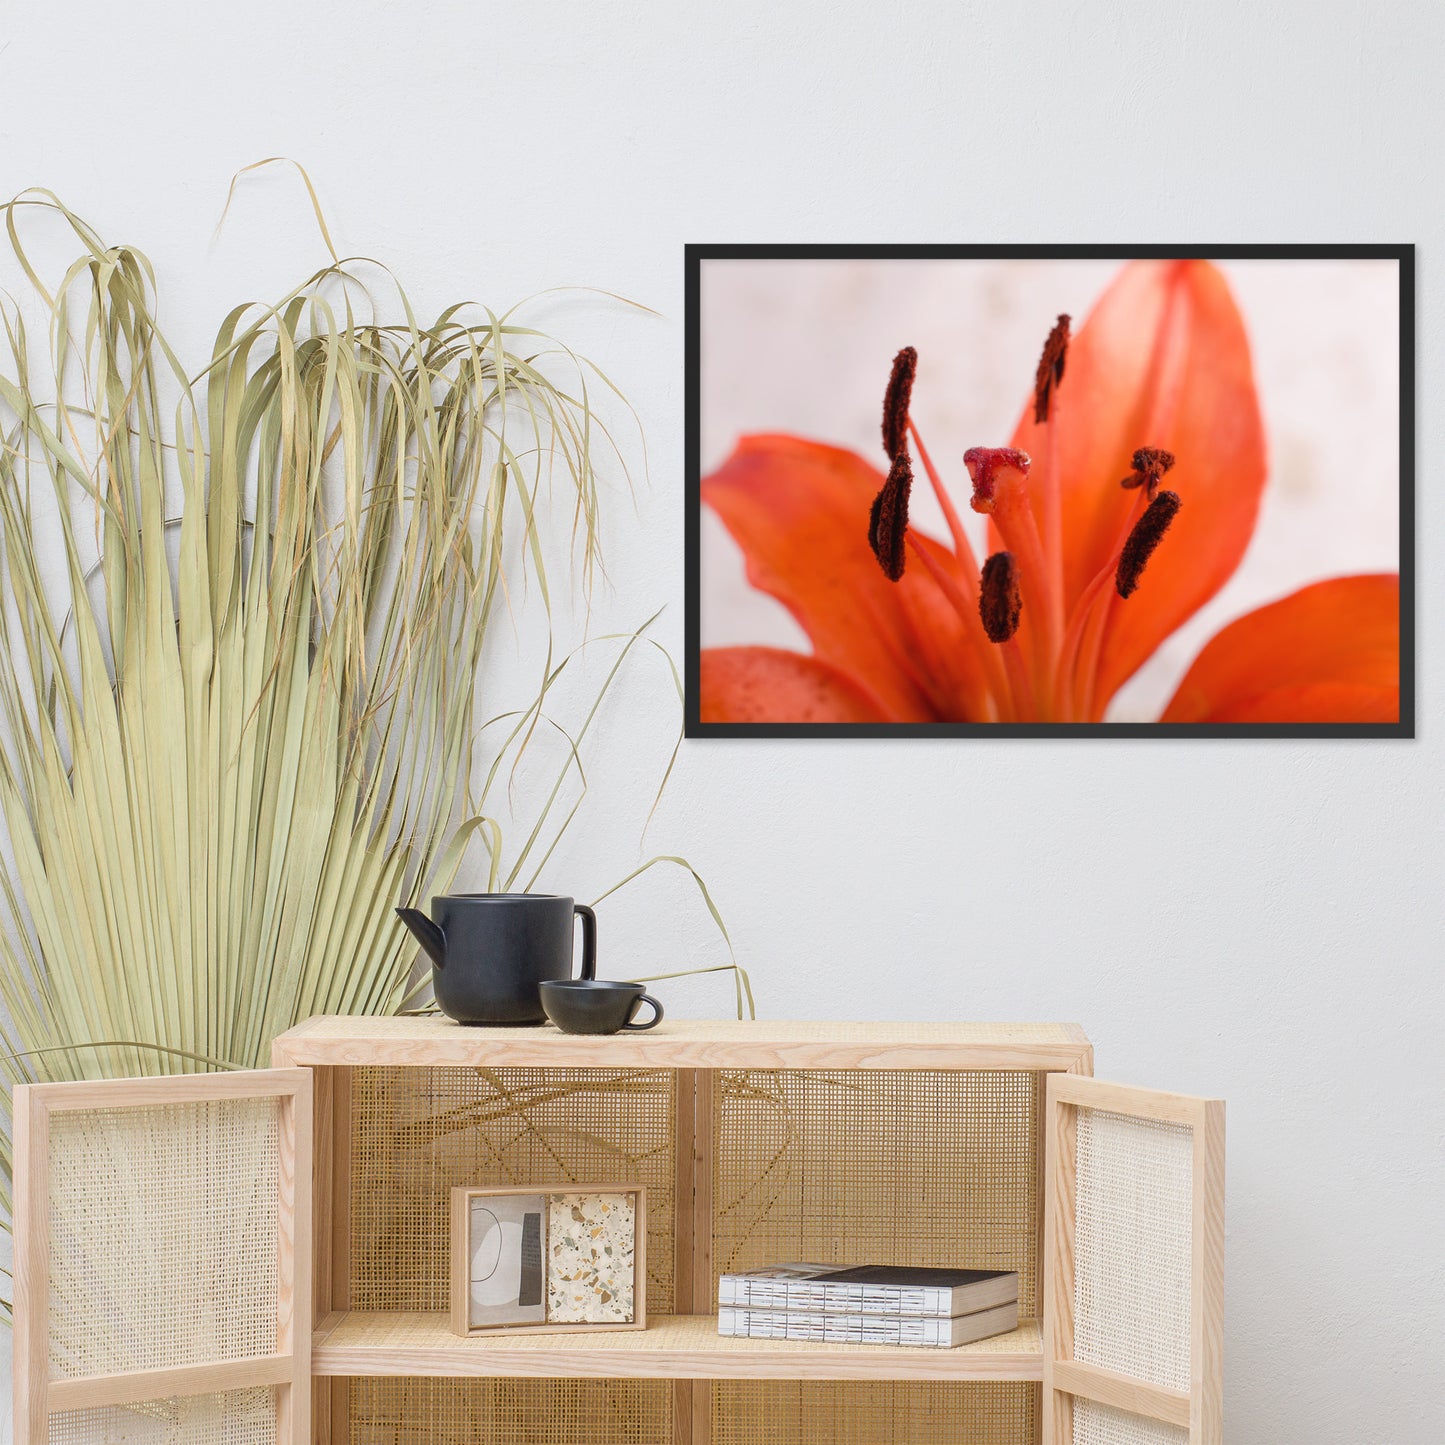 Lily Stigma Floral Nature Photo Framed Wall Art Print